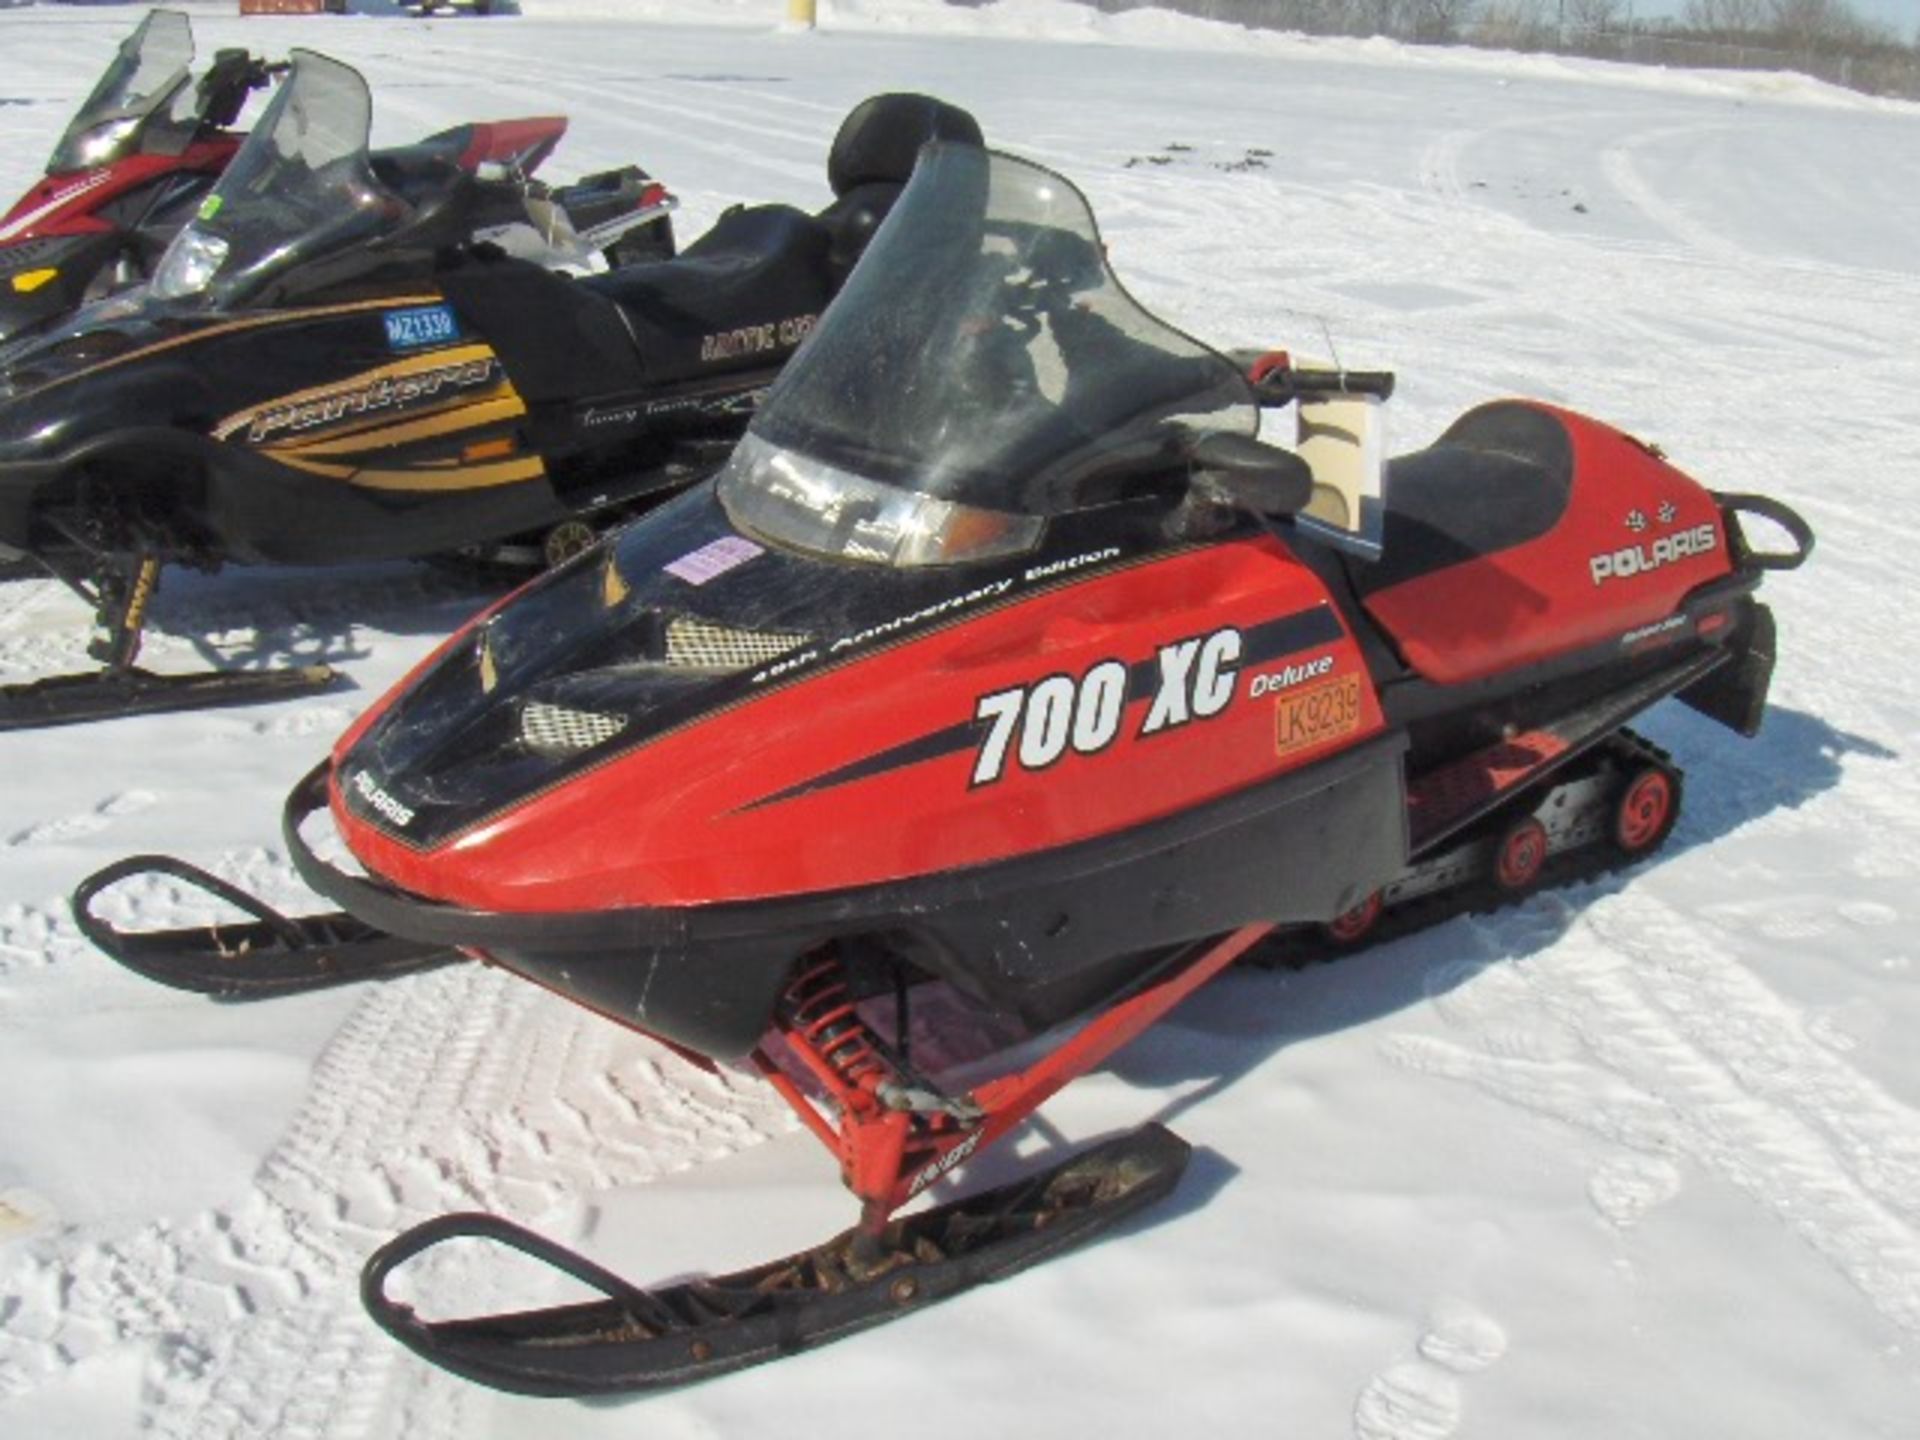 2000 POLARIS 700 XC DELUXE 4XASD7AS3YB051649 snowmobile, owner started at time of check-in, electric